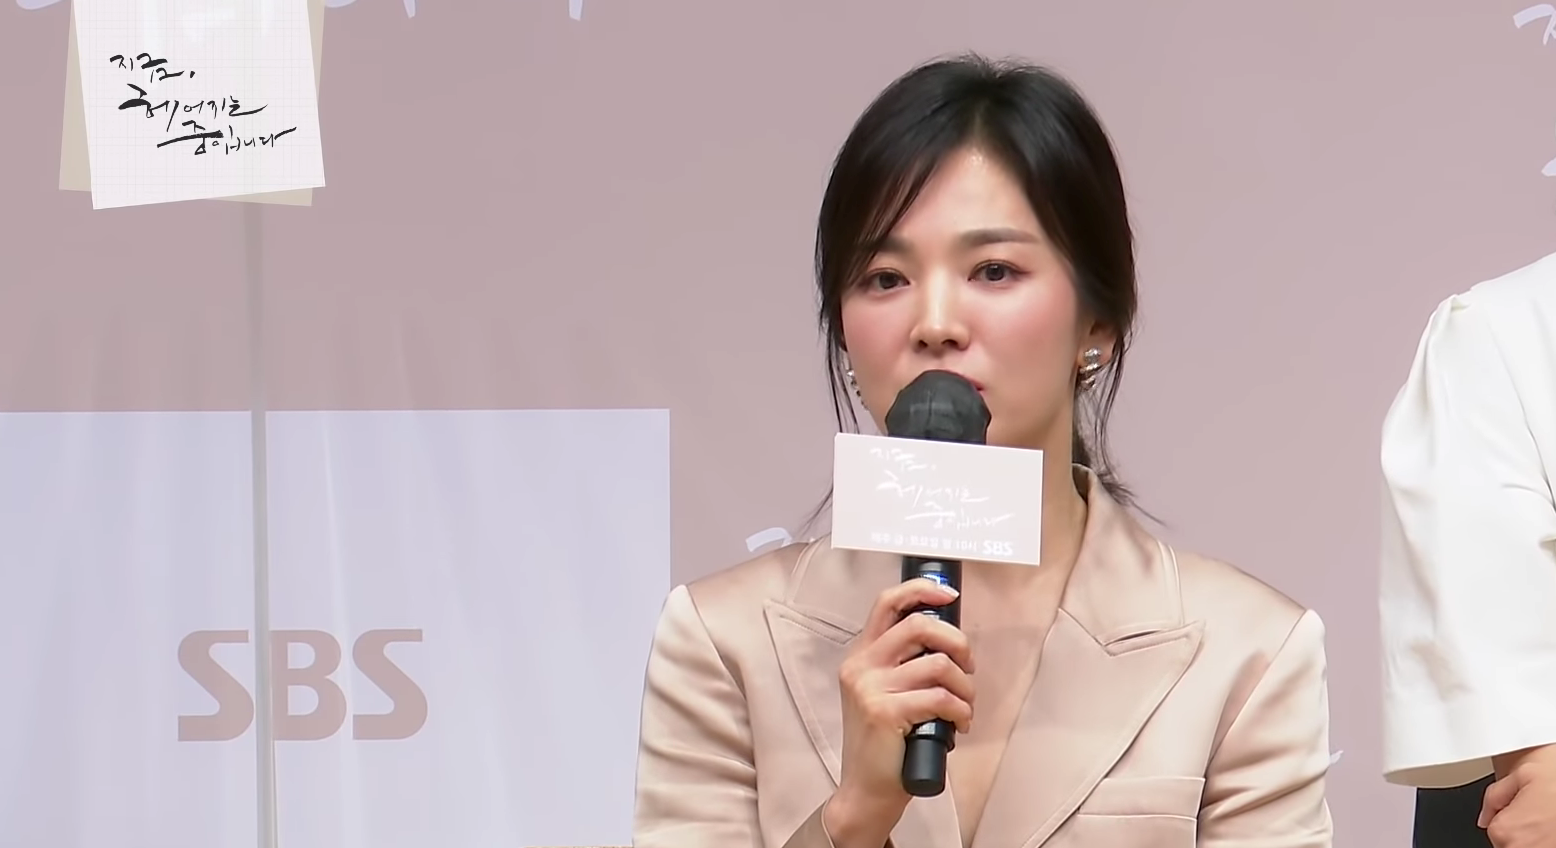 song-hye-kyo-shock-now-we-are-breaking-up-actor-jang-ki-yong-reveals-surprising-detail-about-song-joong-kis-ex-amid-dating-rumors